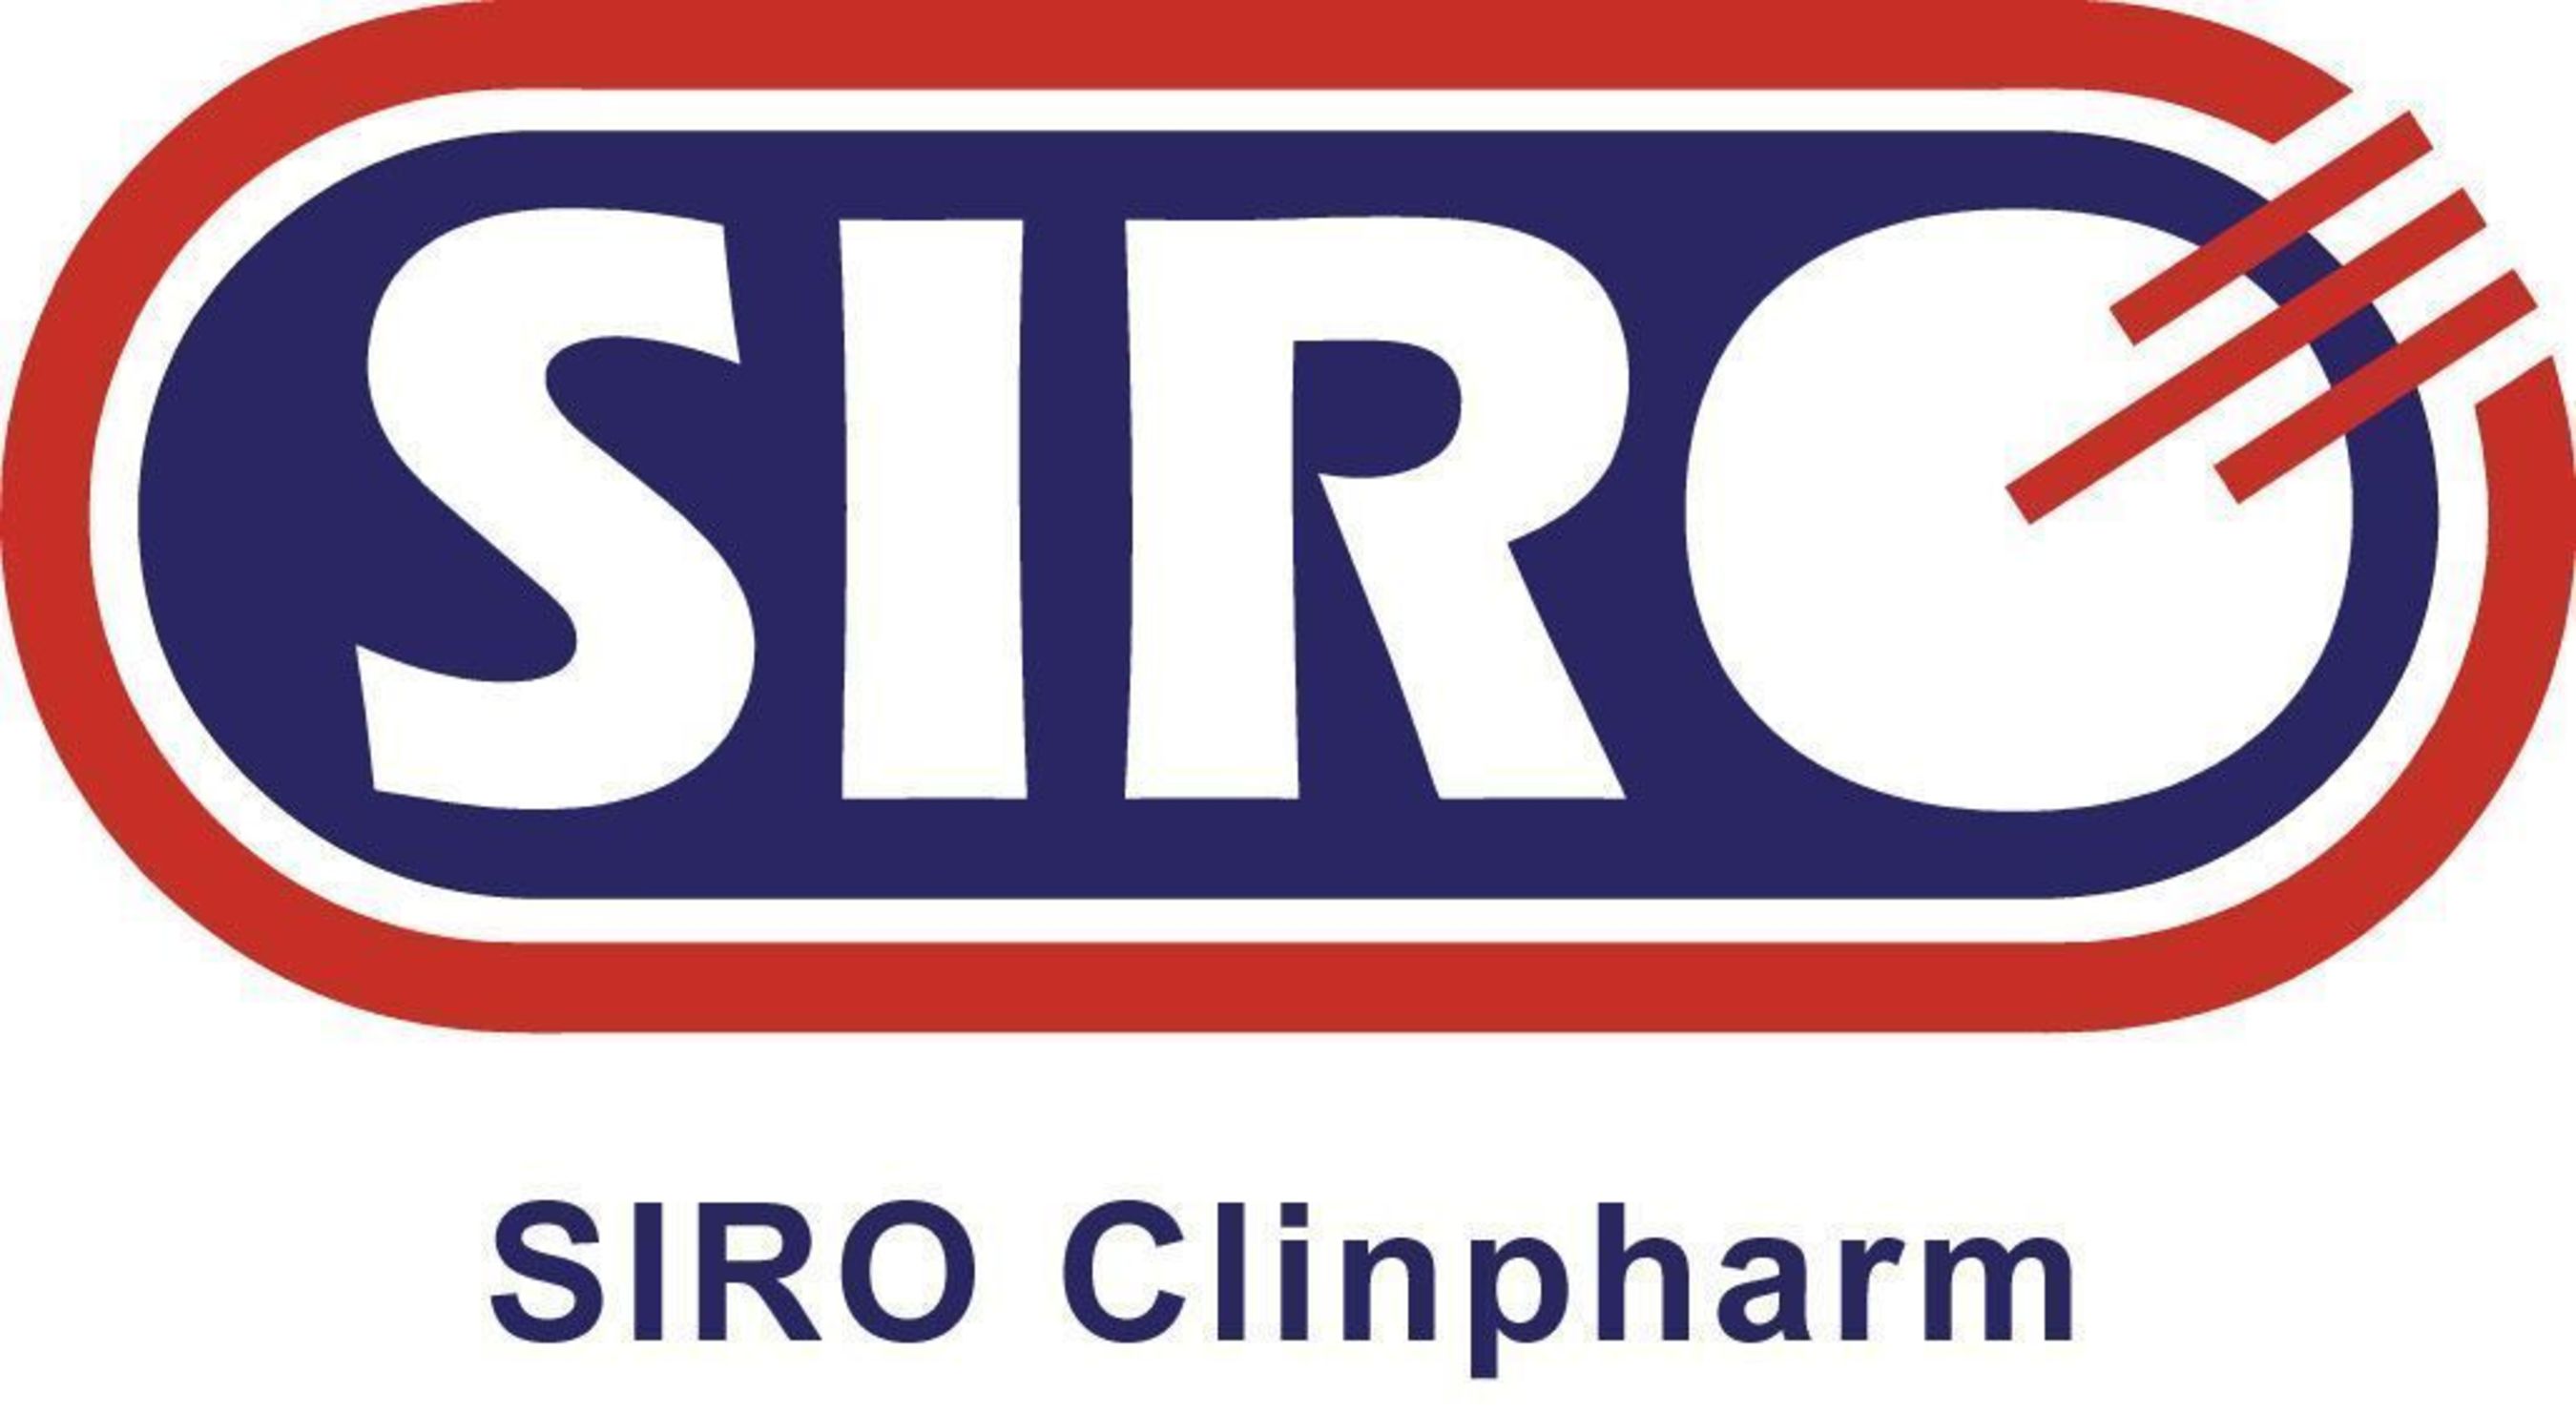 siro clinpharm receives frost & sullivan indian cro of the year 2012 award